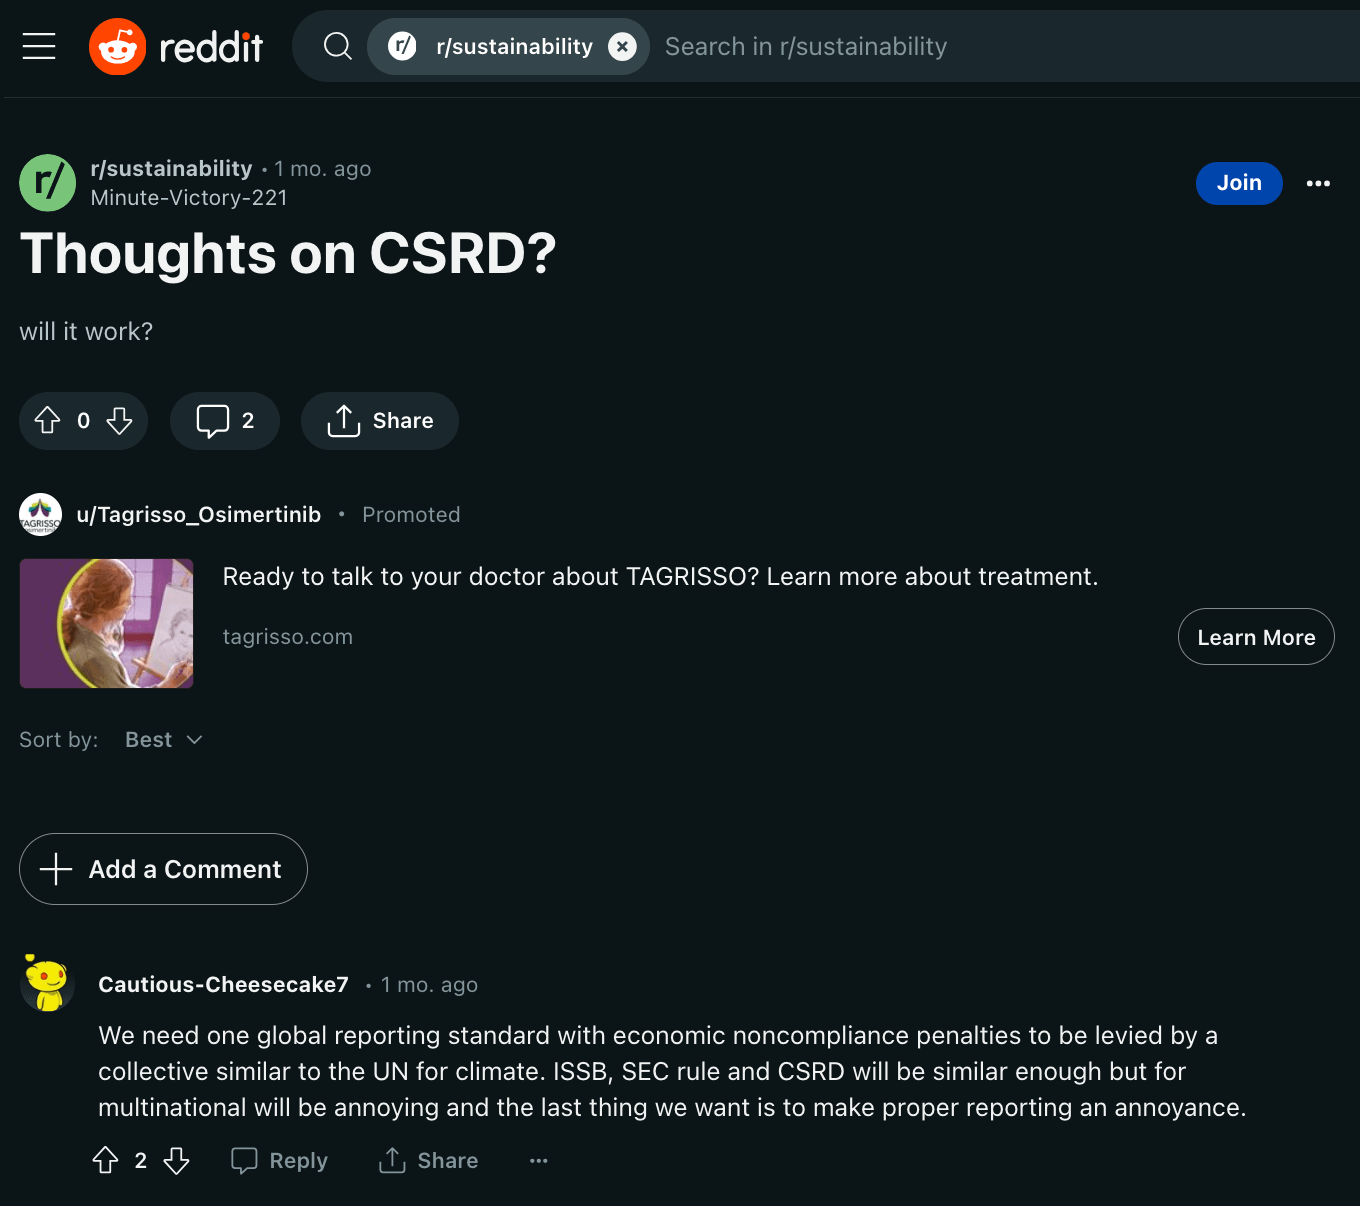 Users discussing the CSRD in Reddit's r/sustainability subreddit